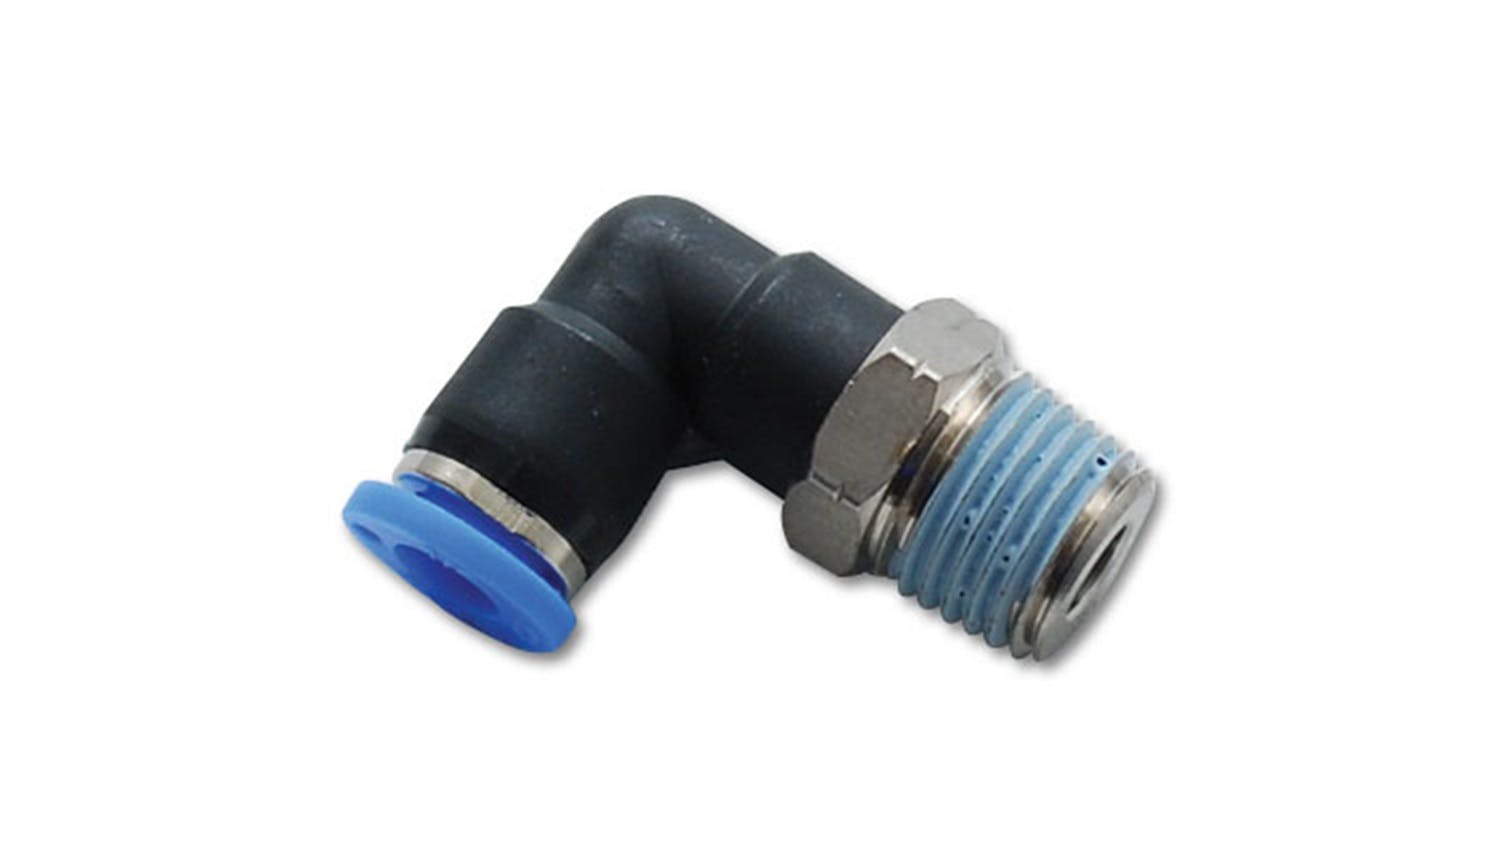 Vibrant Performance 2653 Male Elbow Pneumatic Vacuum Fitting (1/2 inch NPT Thread) for use with 1/4 inch OD